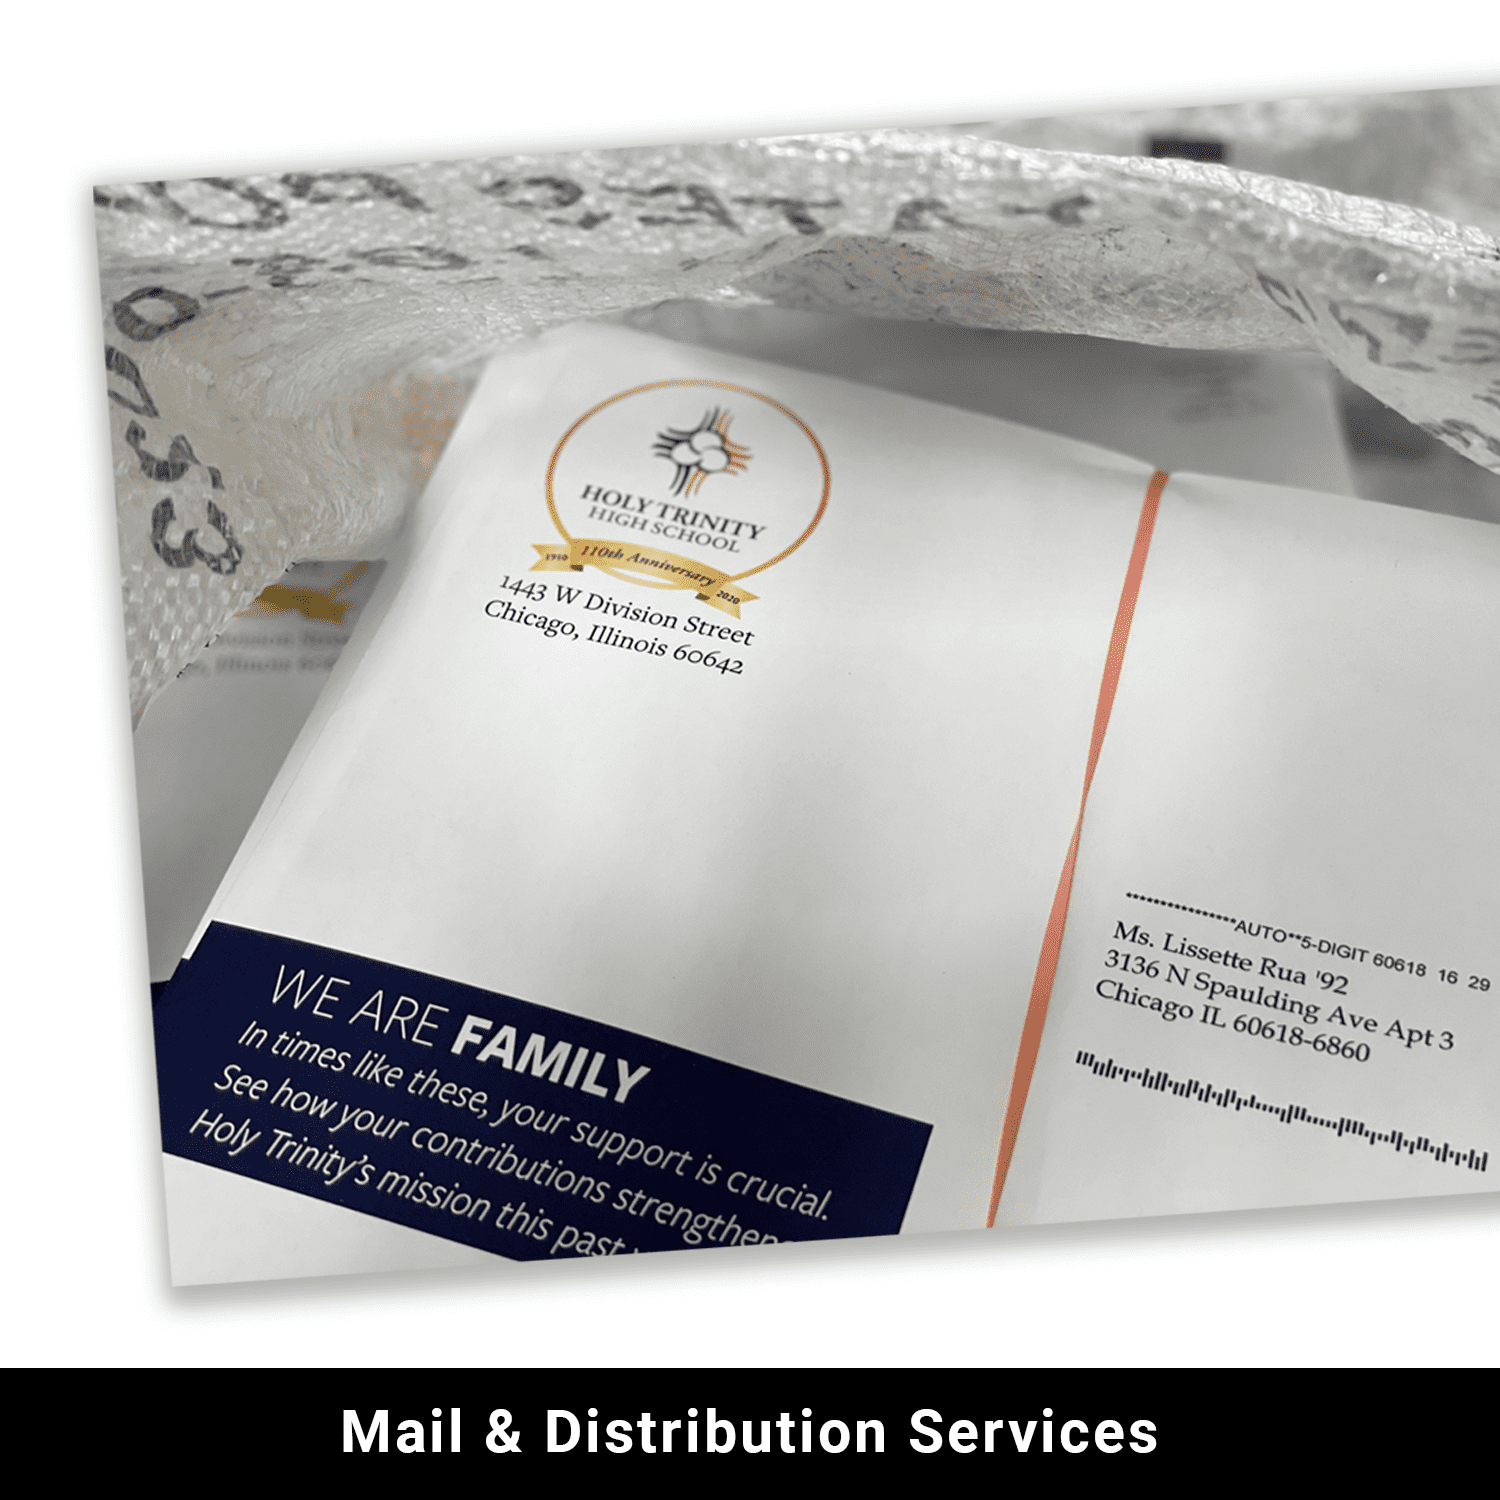 Mail and distribution services